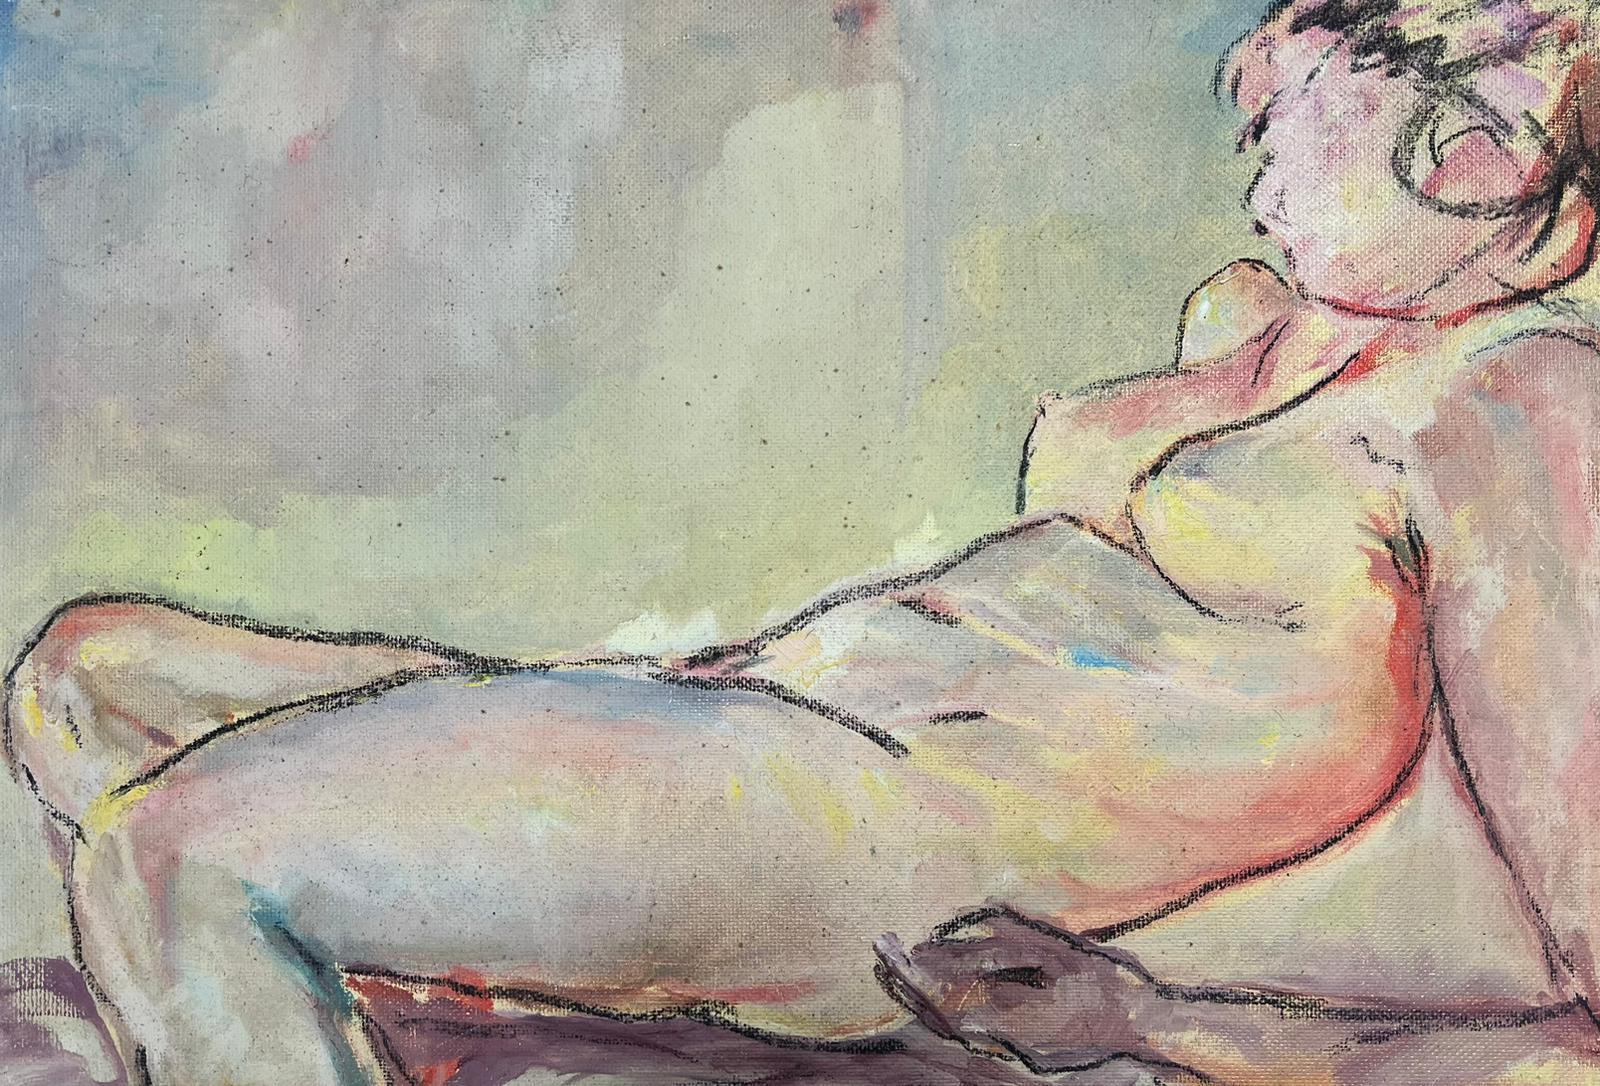 British 20th century Portrait Painting - Nude Lady Reclining Model Sketchy 20th century Beige Earthy Tones oil painting